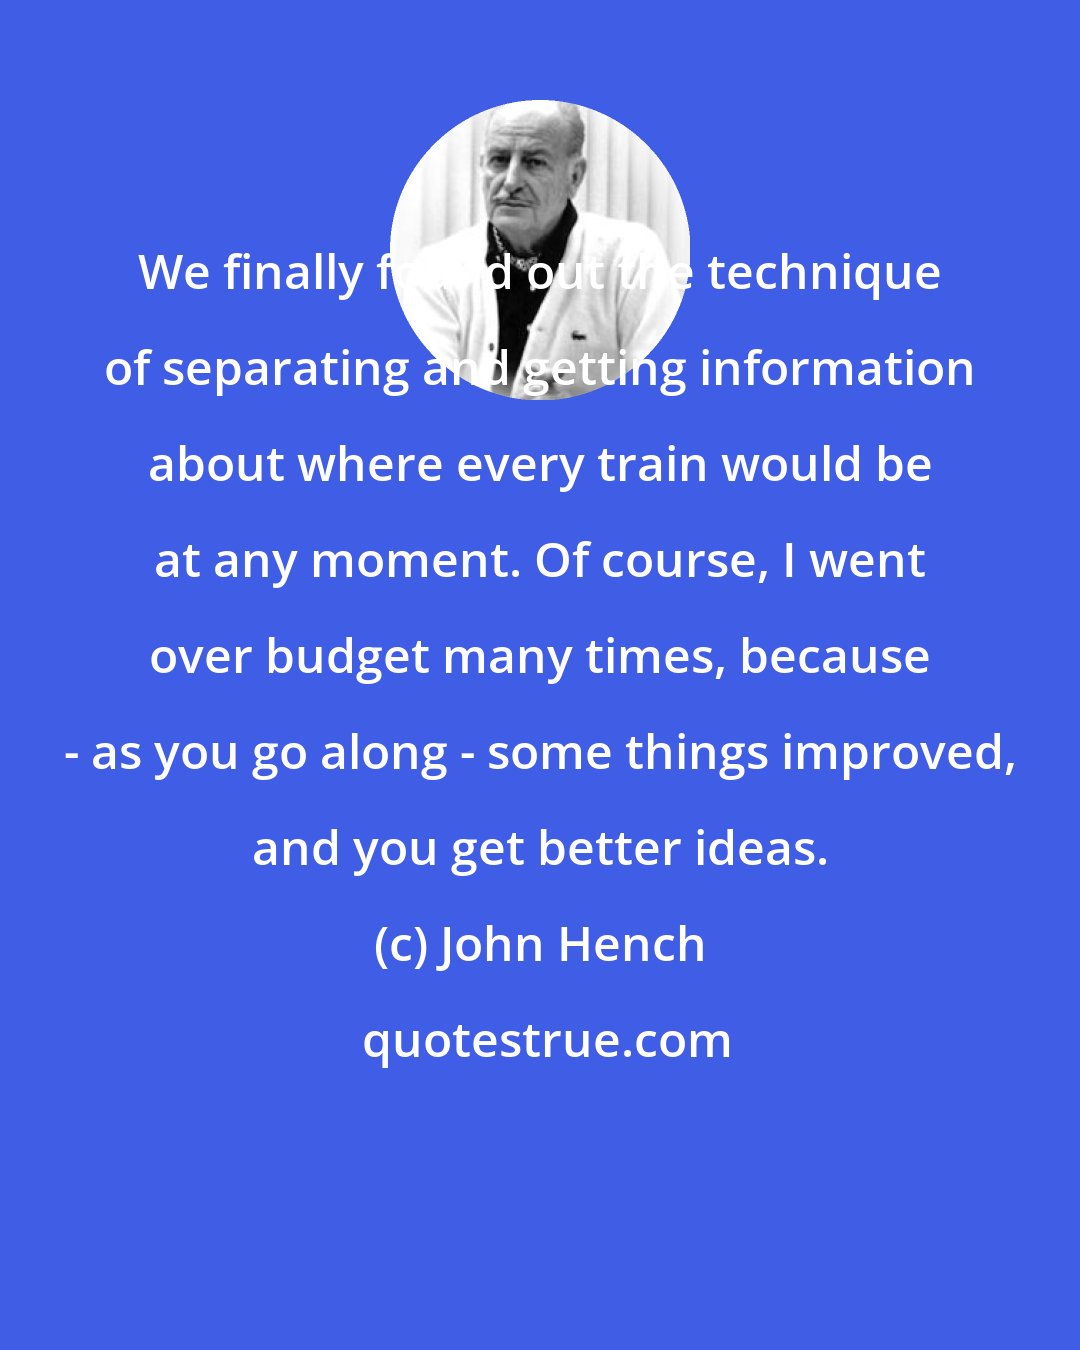 John Hench: We finally found out the technique of separating and getting information about where every train would be at any moment. Of course, I went over budget many times, because - as you go along - some things improved, and you get better ideas.